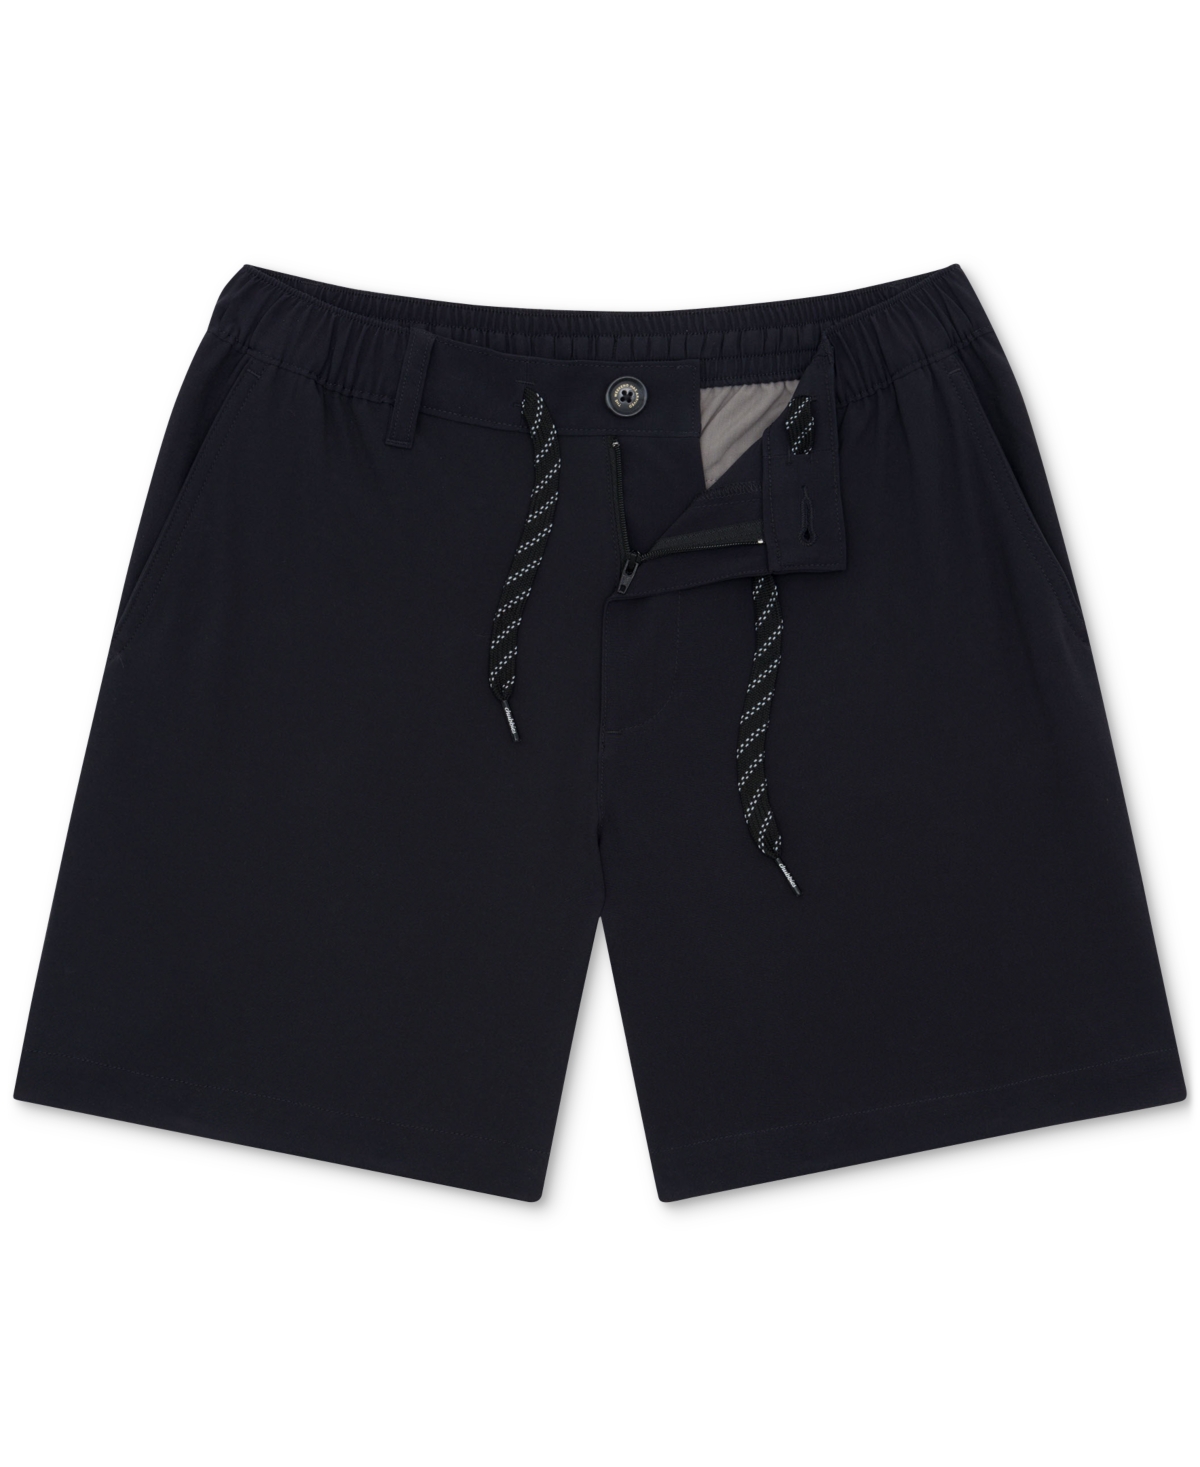 Shop Chubbies Men's The Midnight Adventures Everywear 6" Performance Shorts In Black - So